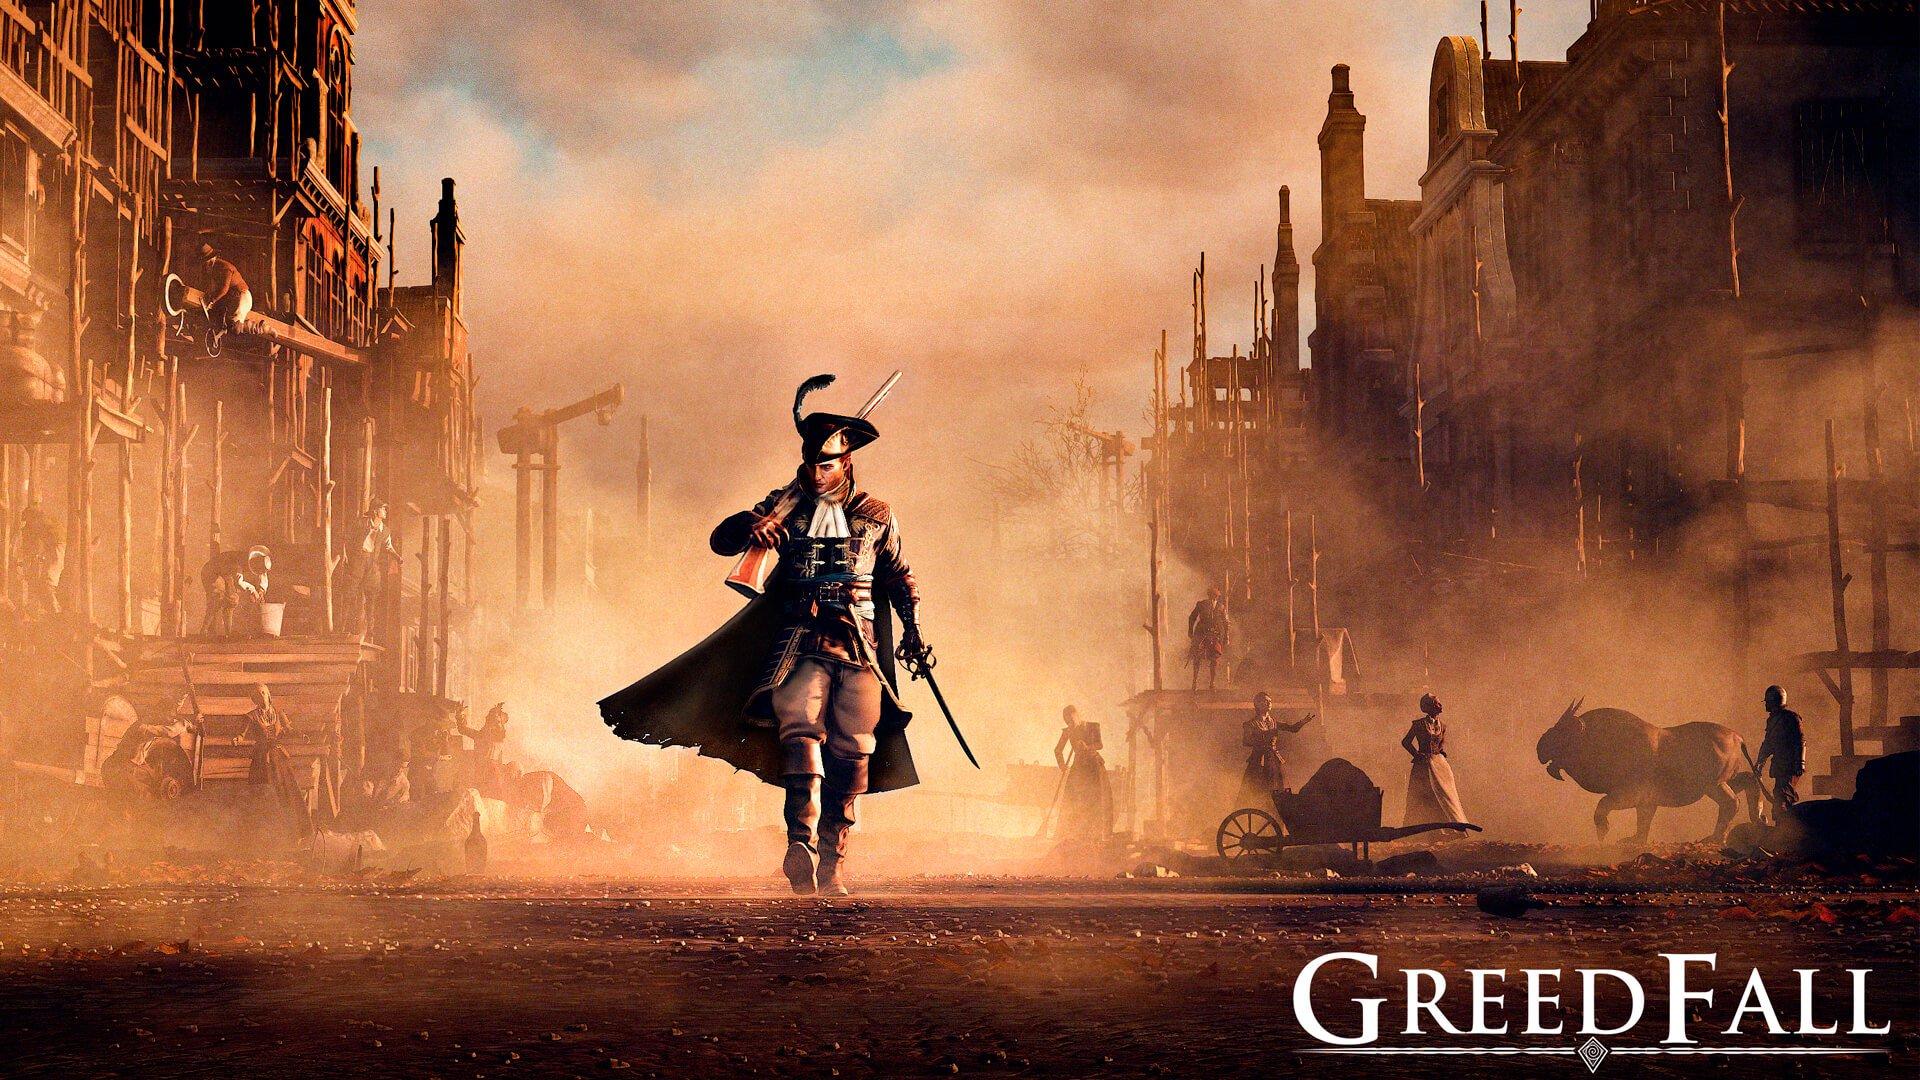 greedfall 1080P 2k 4k Full HD Wallpapers Backgrounds Free Download   Wallpaper Crafter